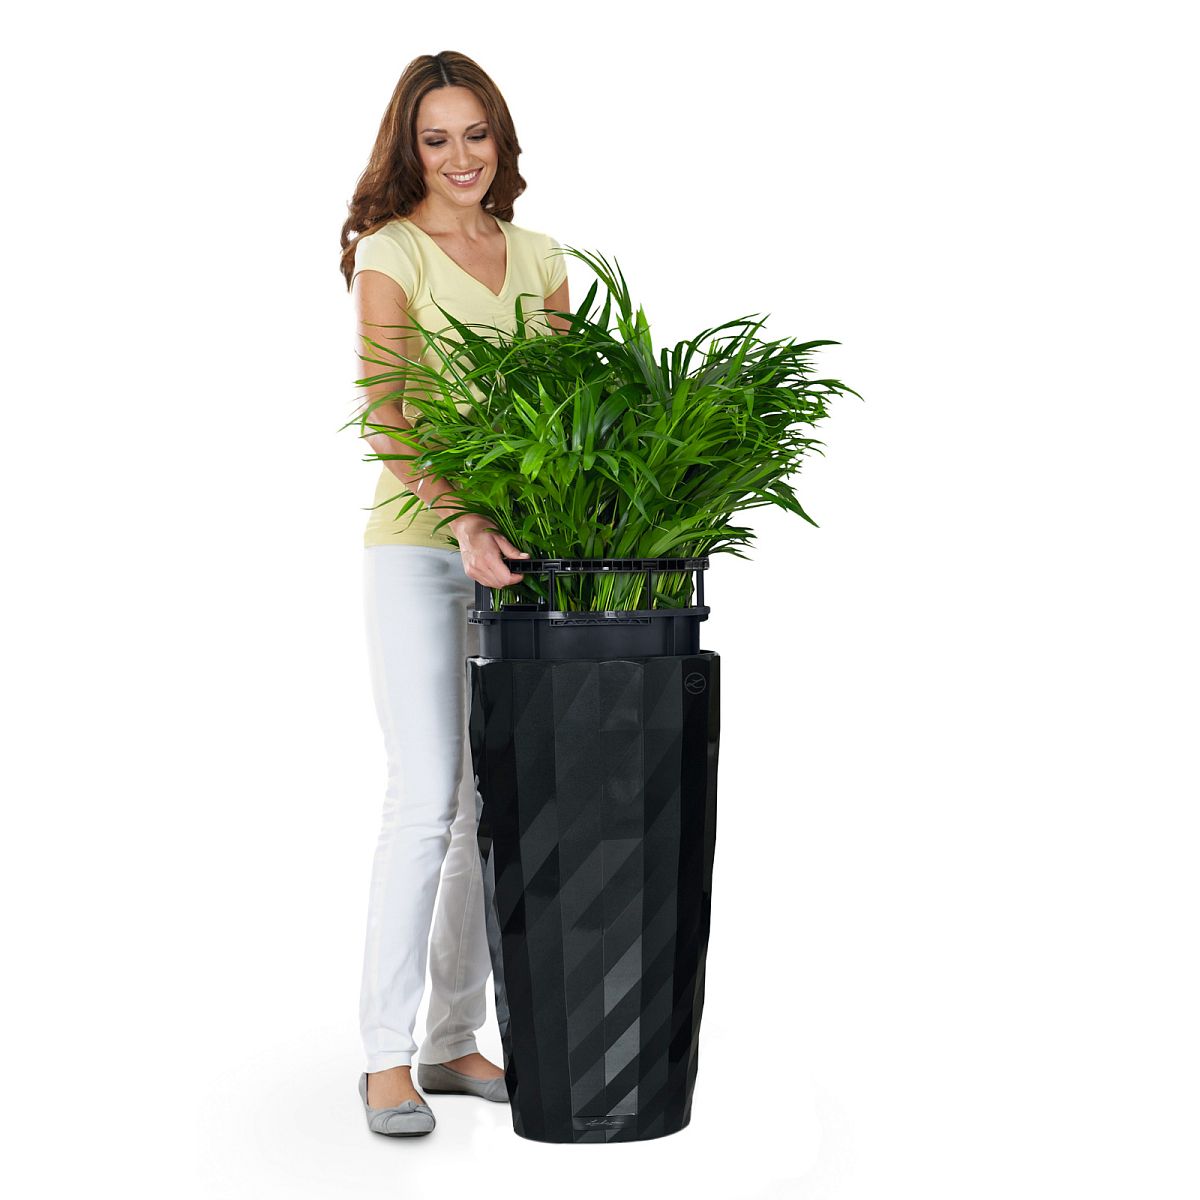 LECHUZA DIAMANTE Premium Poly Resin Floor Self-watering Planter with Substrate and Water Level Indicator - citiplants.com